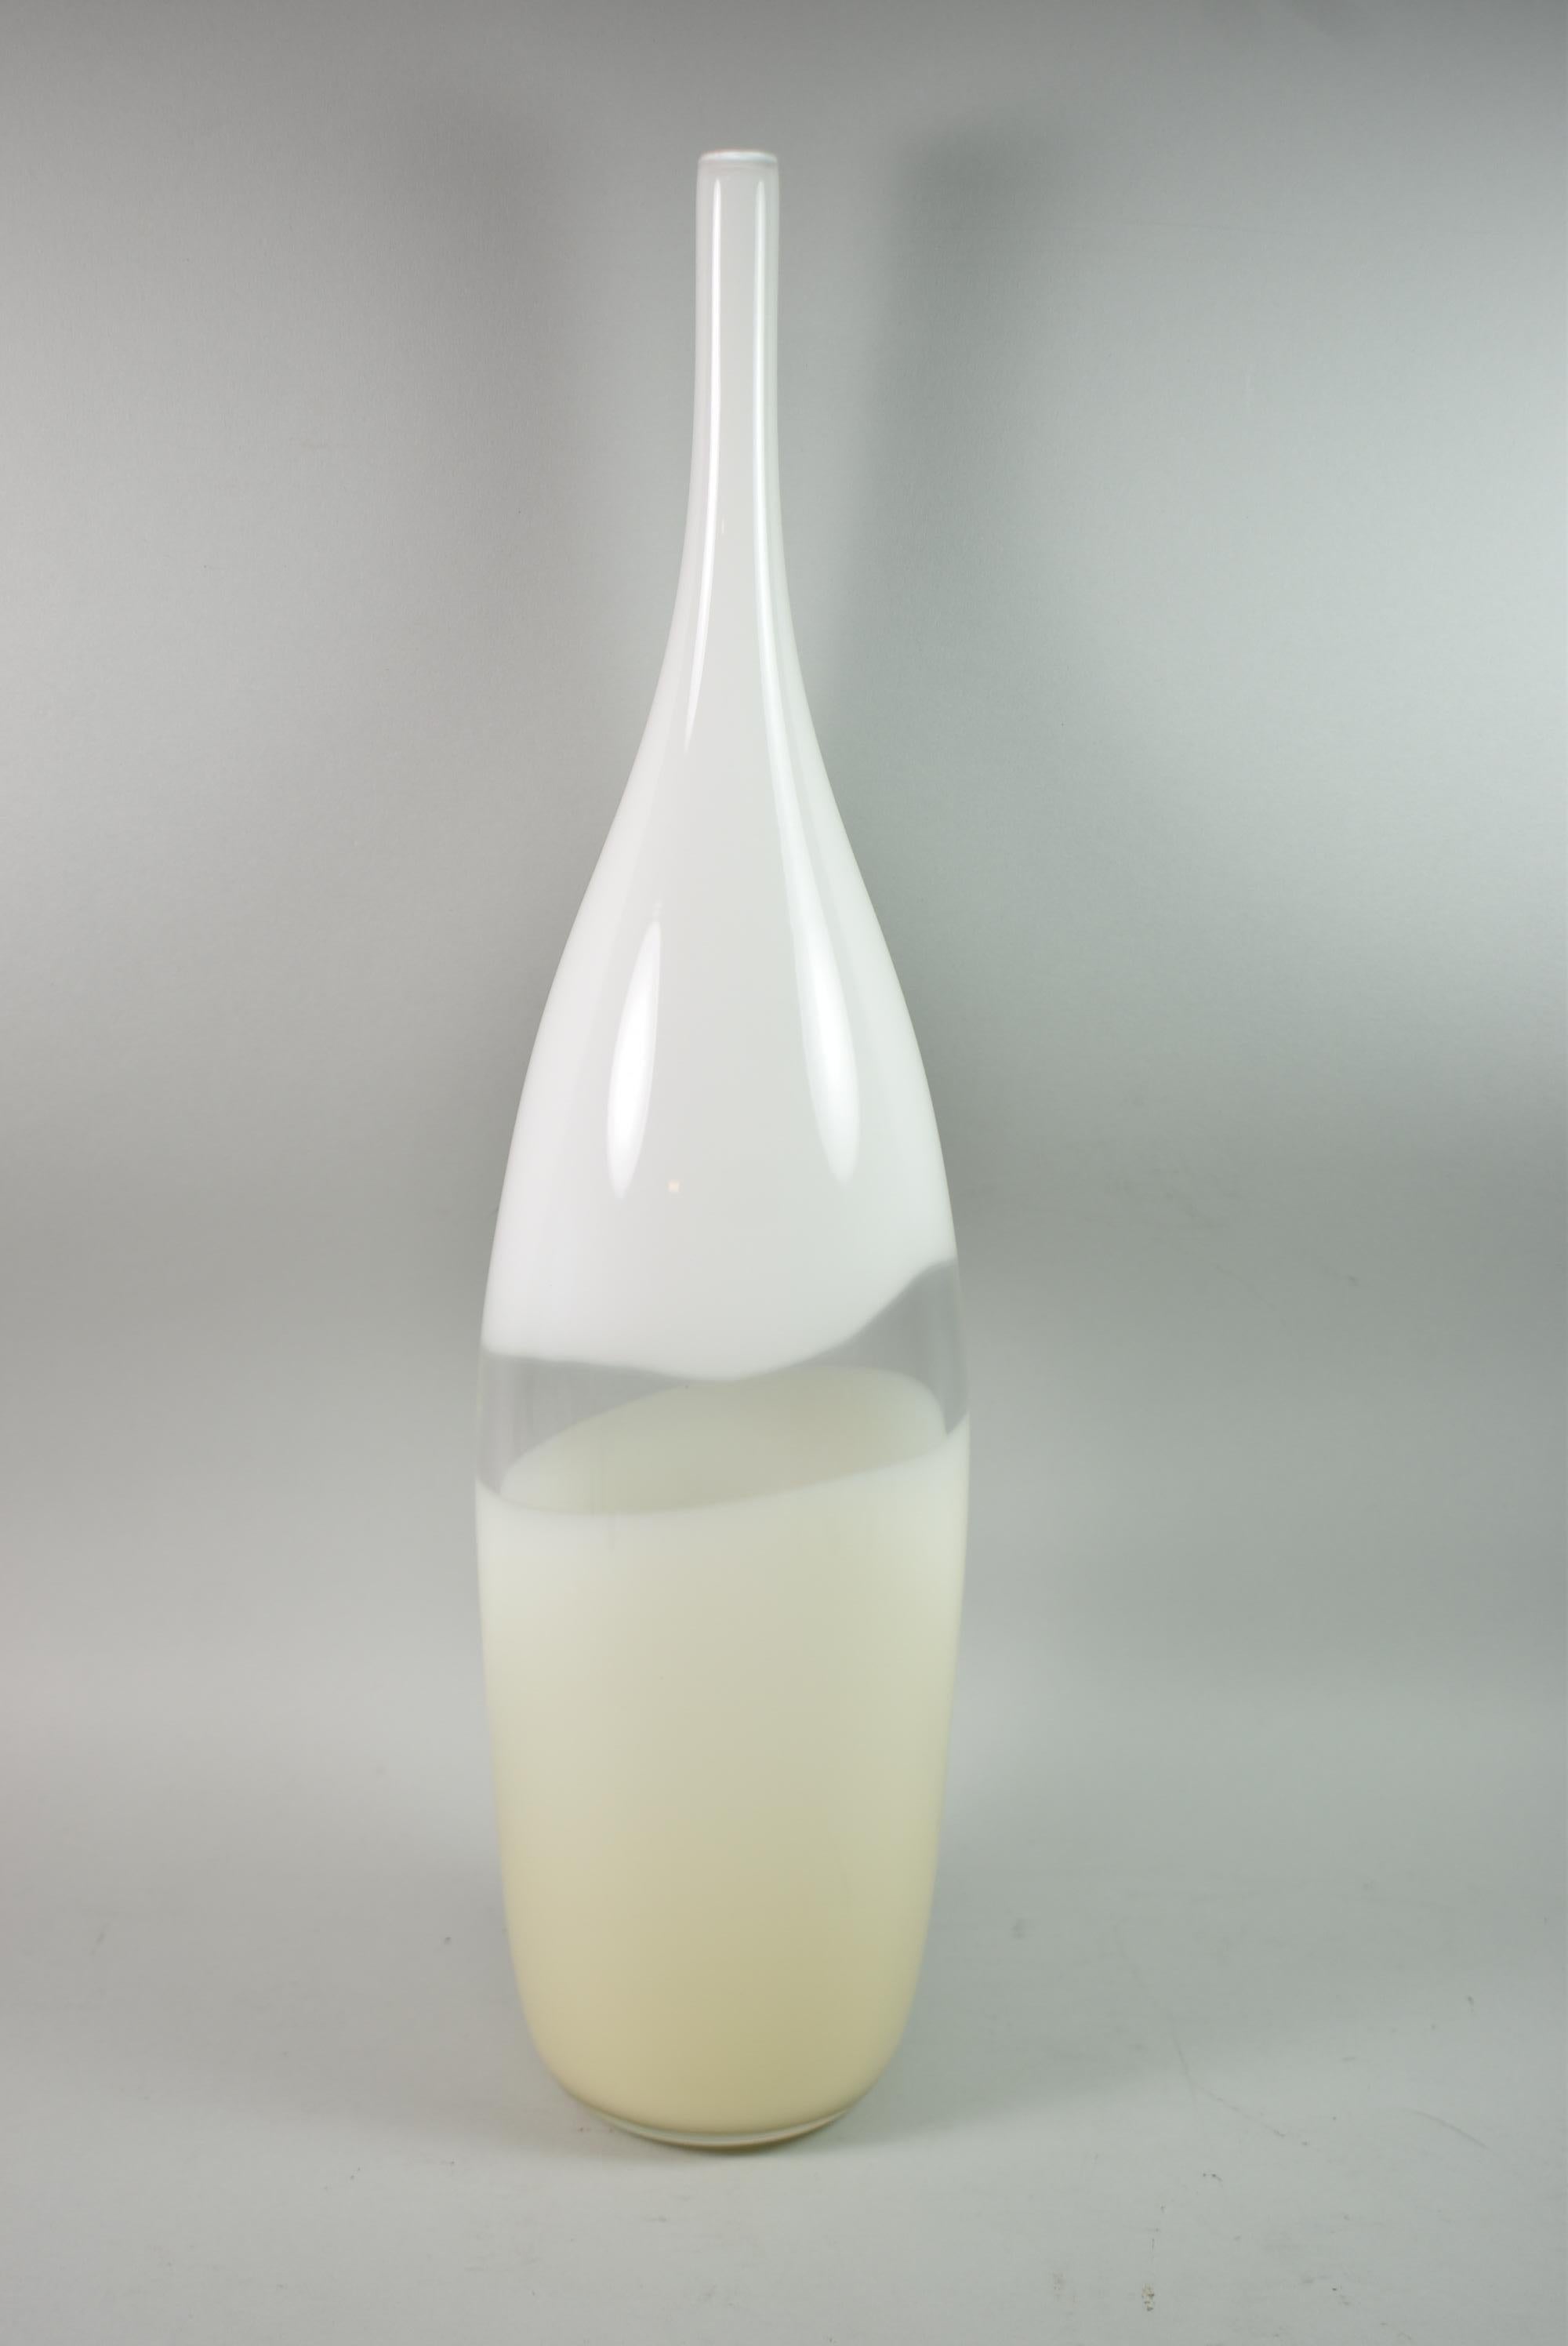 Caleb Siemon Murano style art glass vase in white, cream and clear glass. Very nice condition. Dimensions: 5